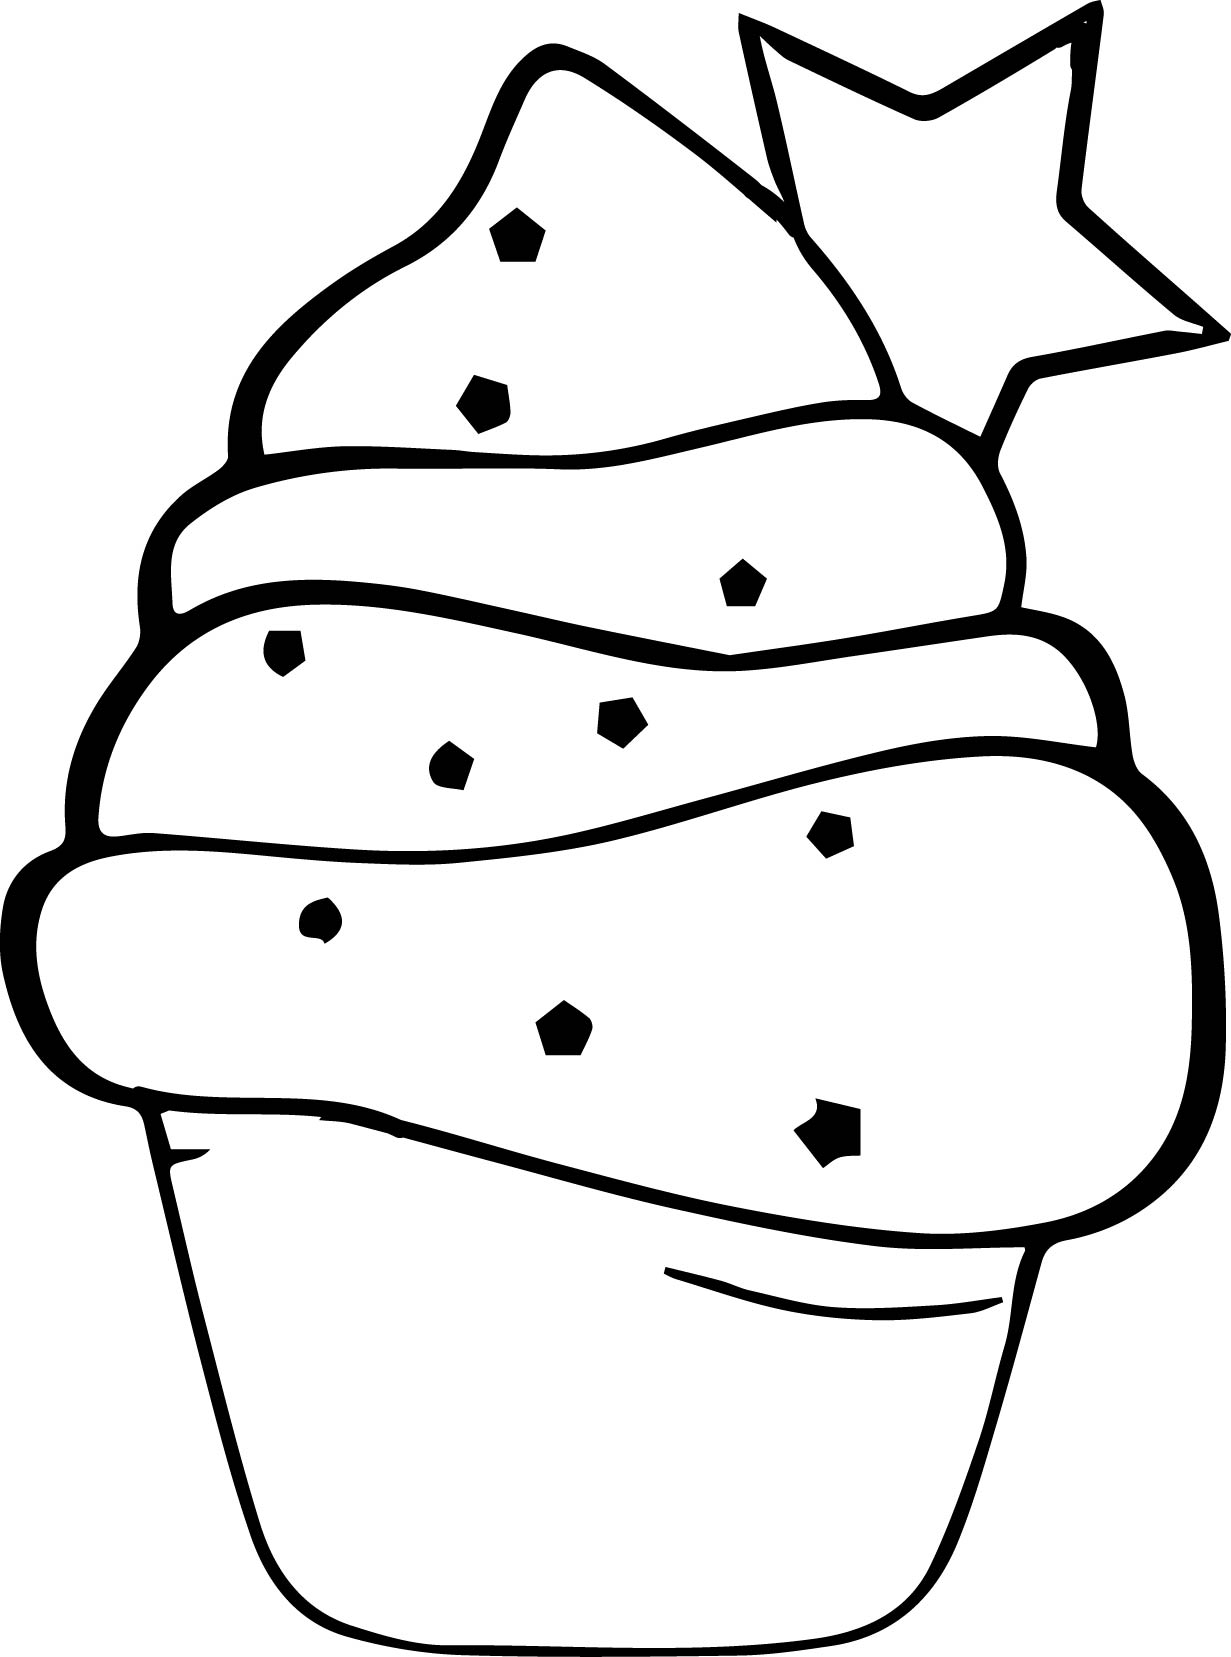 Slice Of Cake Coloring Page at GetColorings.com | Free printable